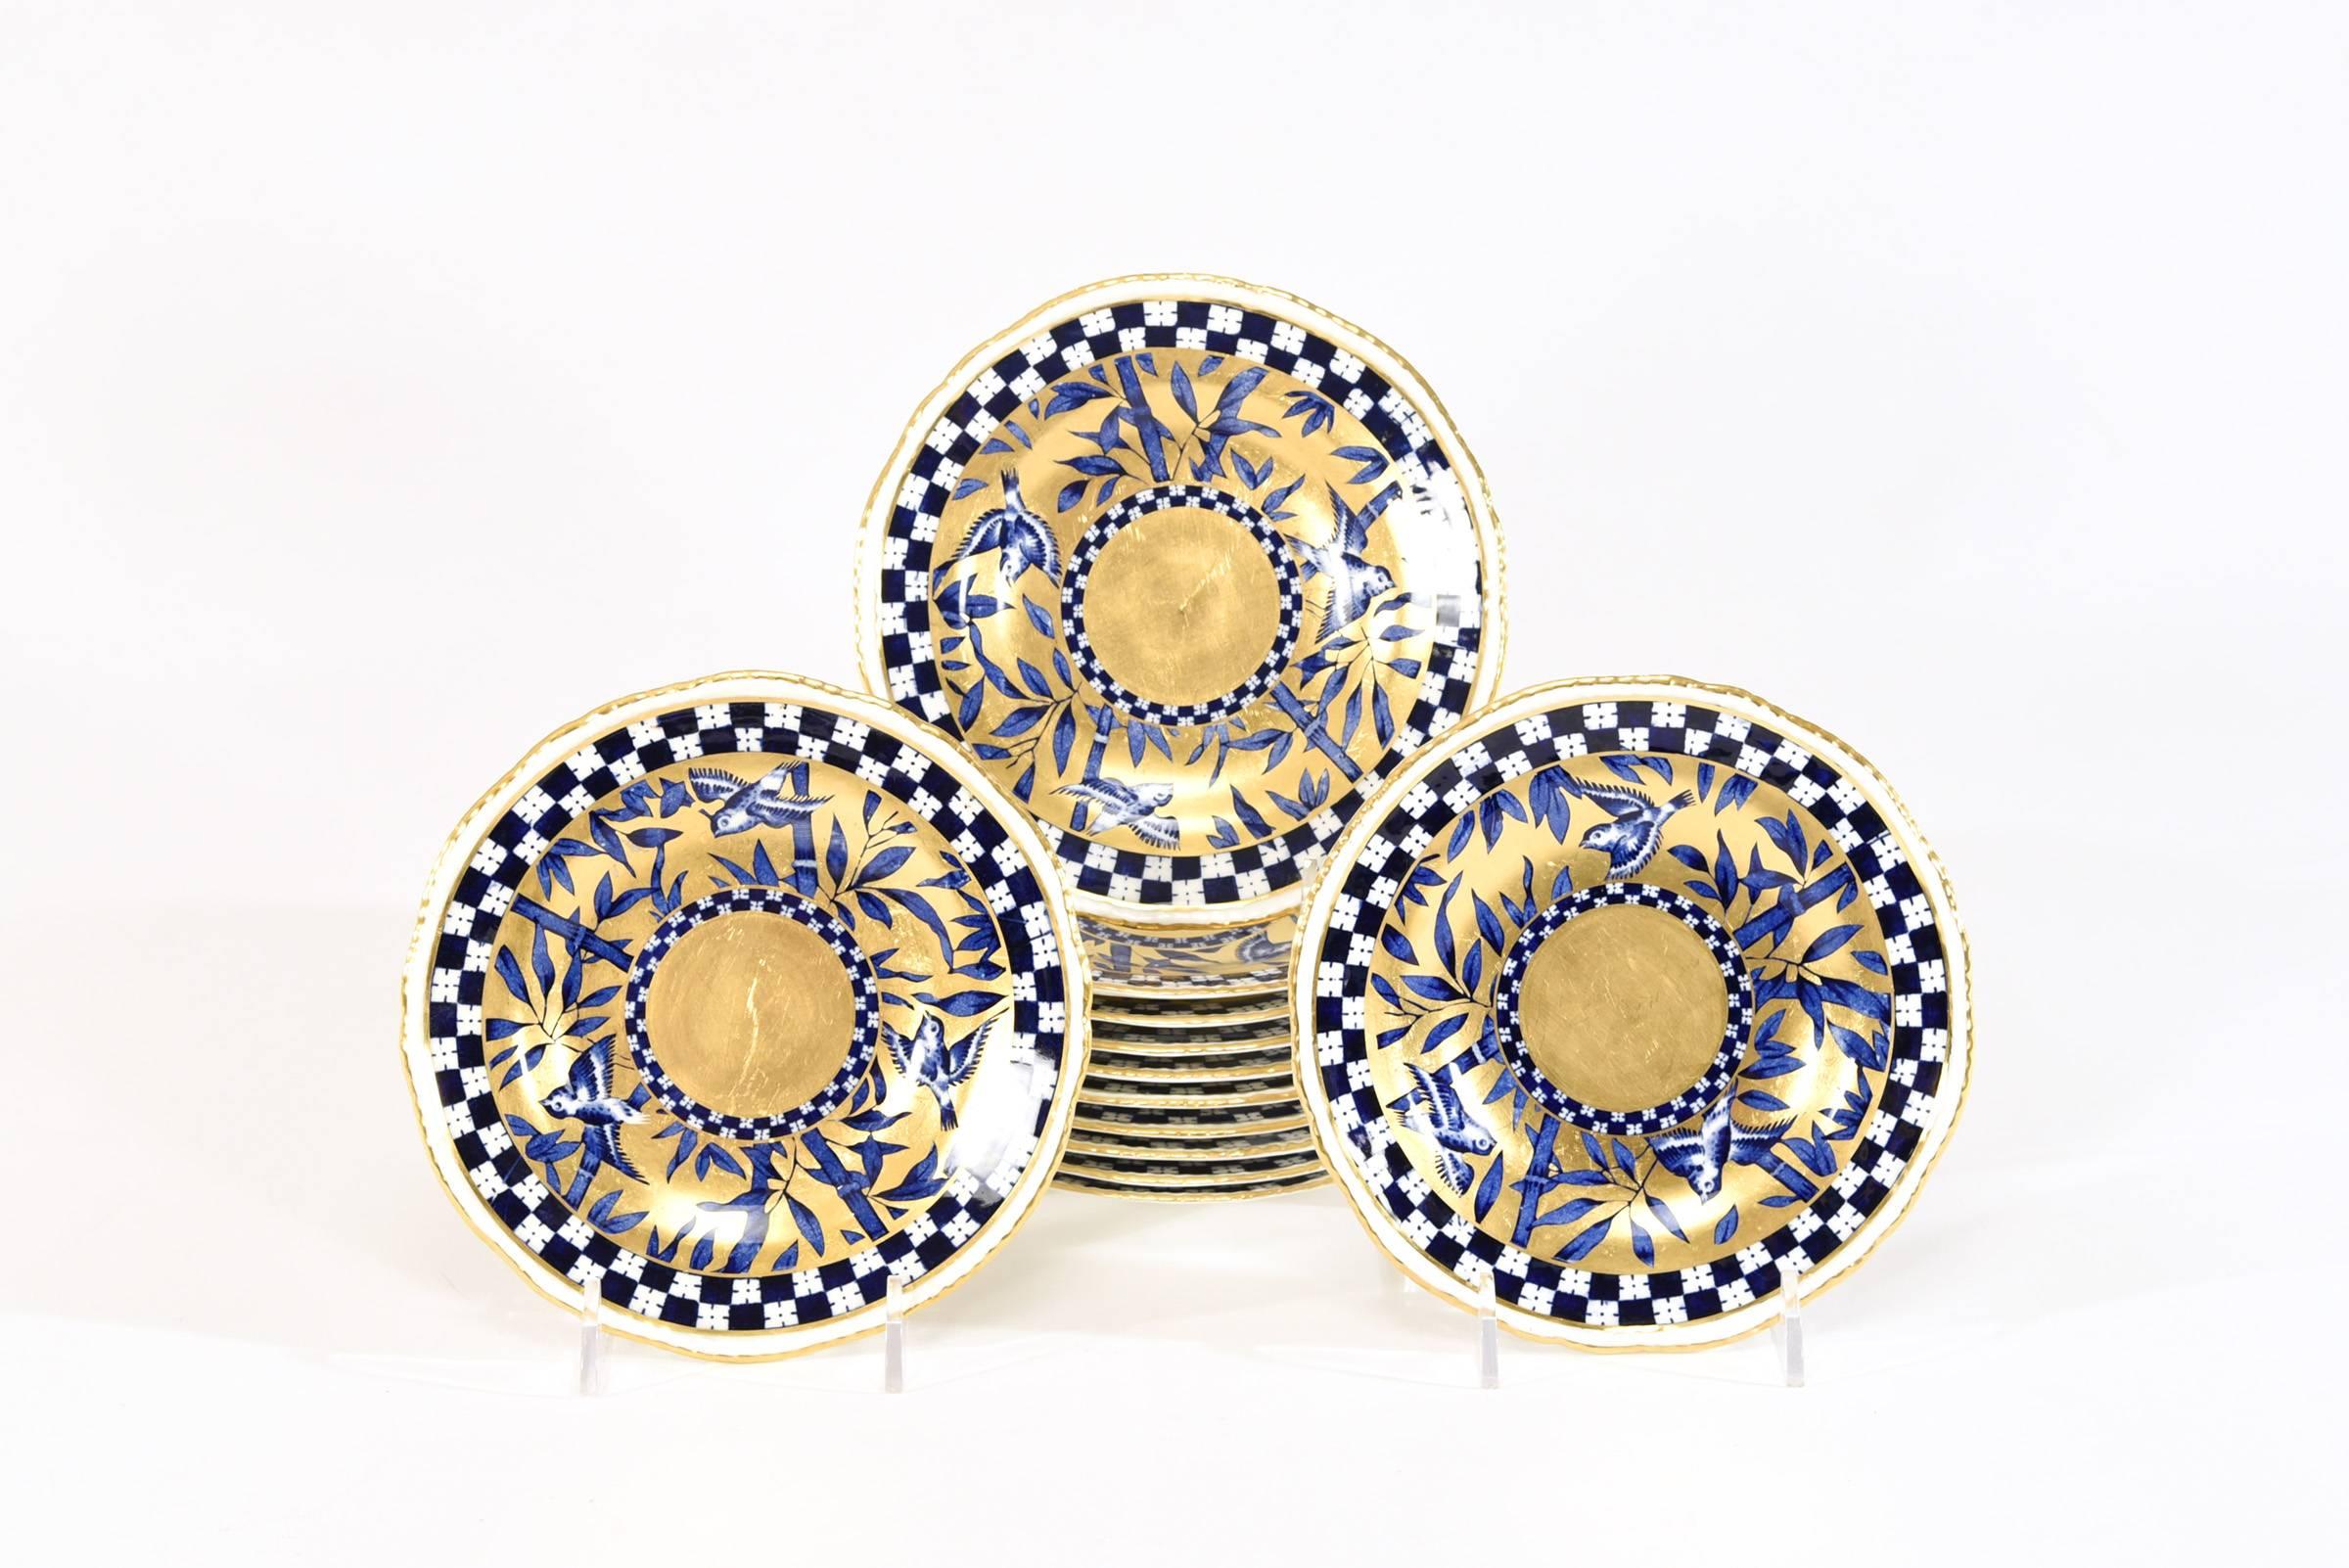 One of the Classic variations of Coalport's aesthetic movement patterns, this set of 12 side plates features gold overlay on a cobalt blue and white 